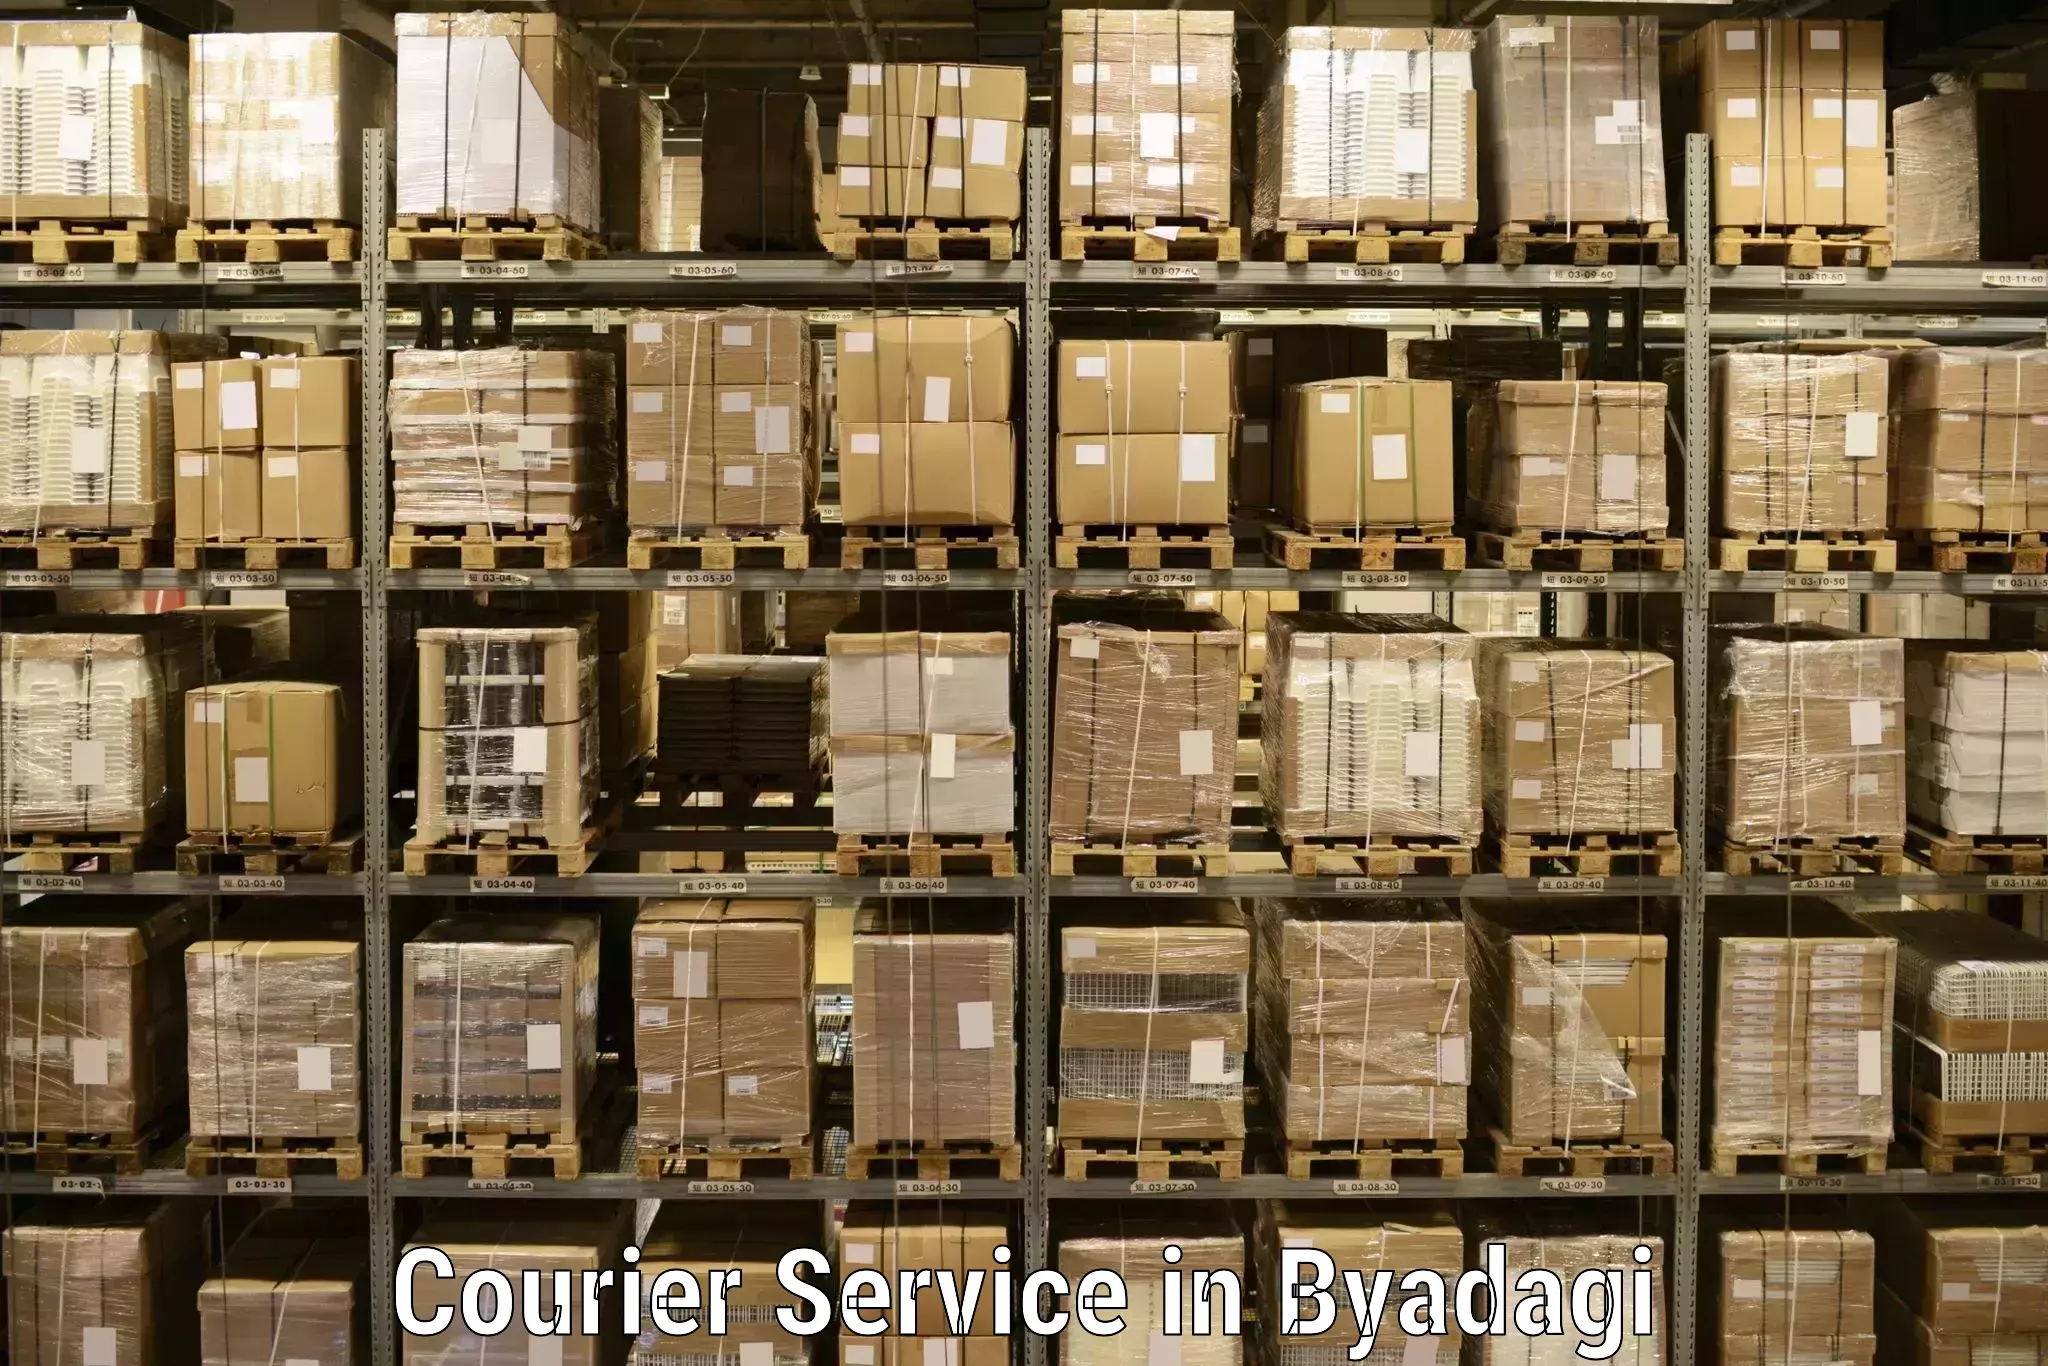 Enhanced delivery experience in Byadagi